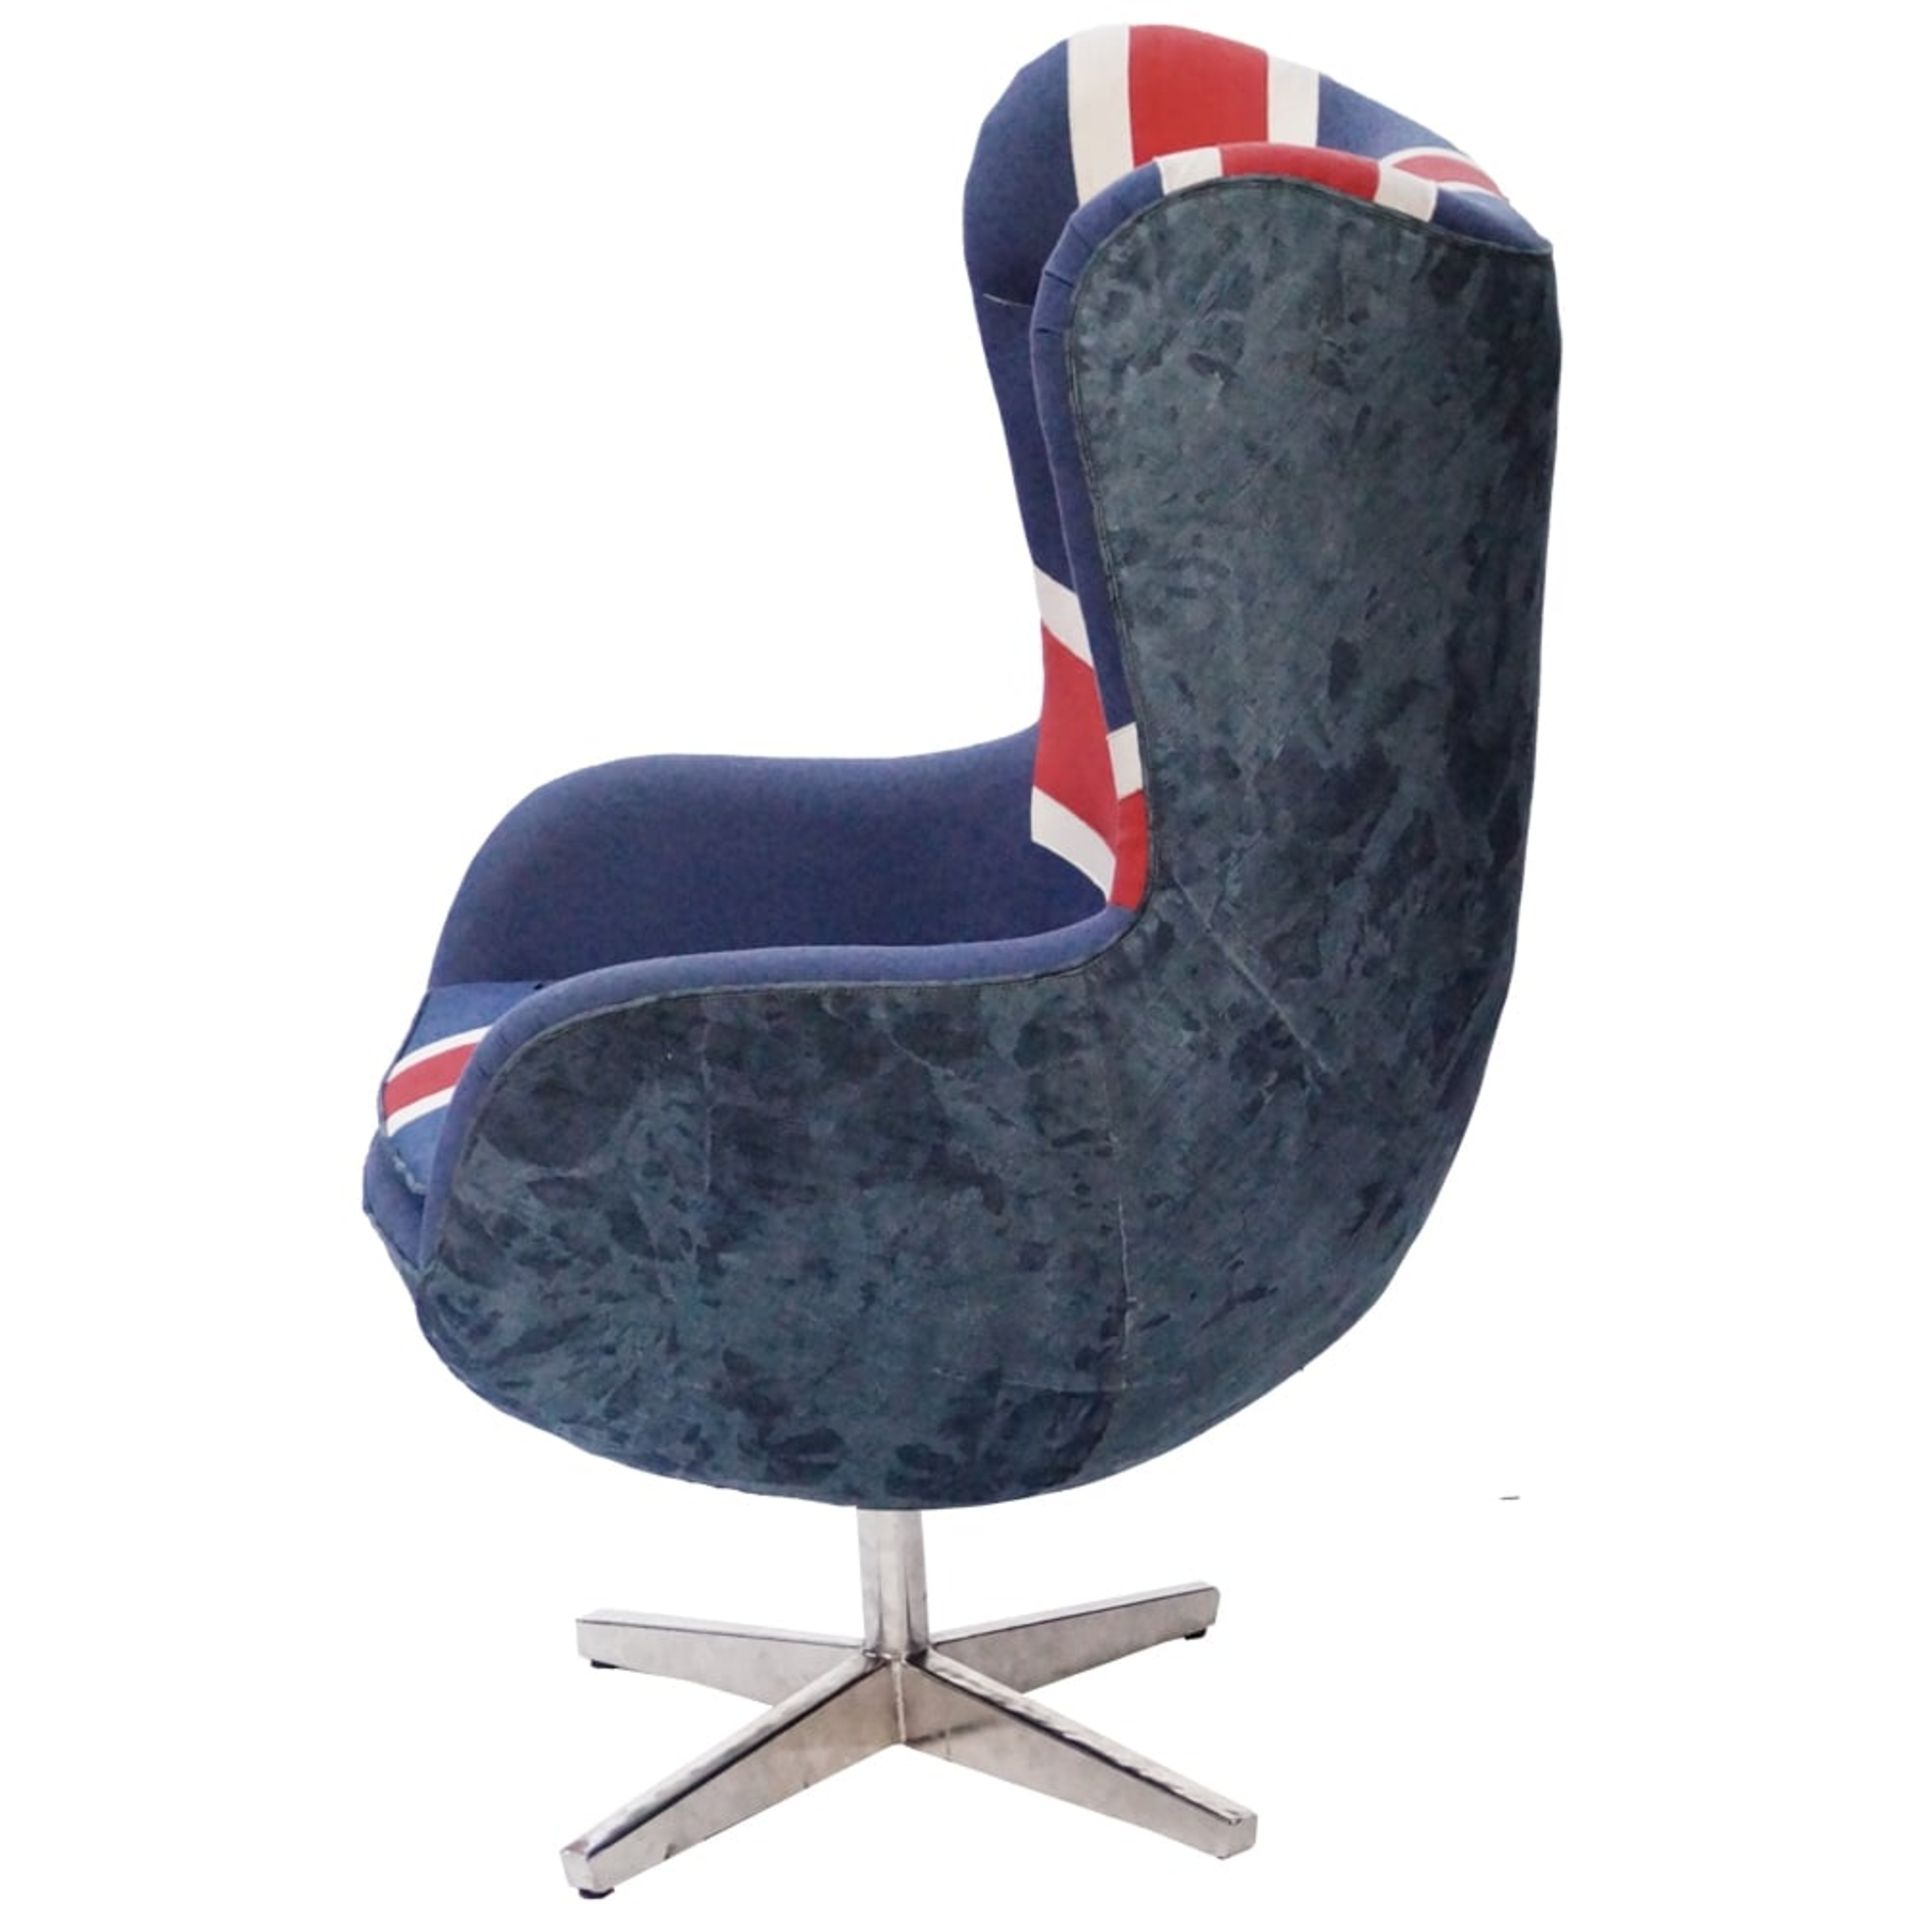 Union Jack Egg Chair - Image 2 of 9